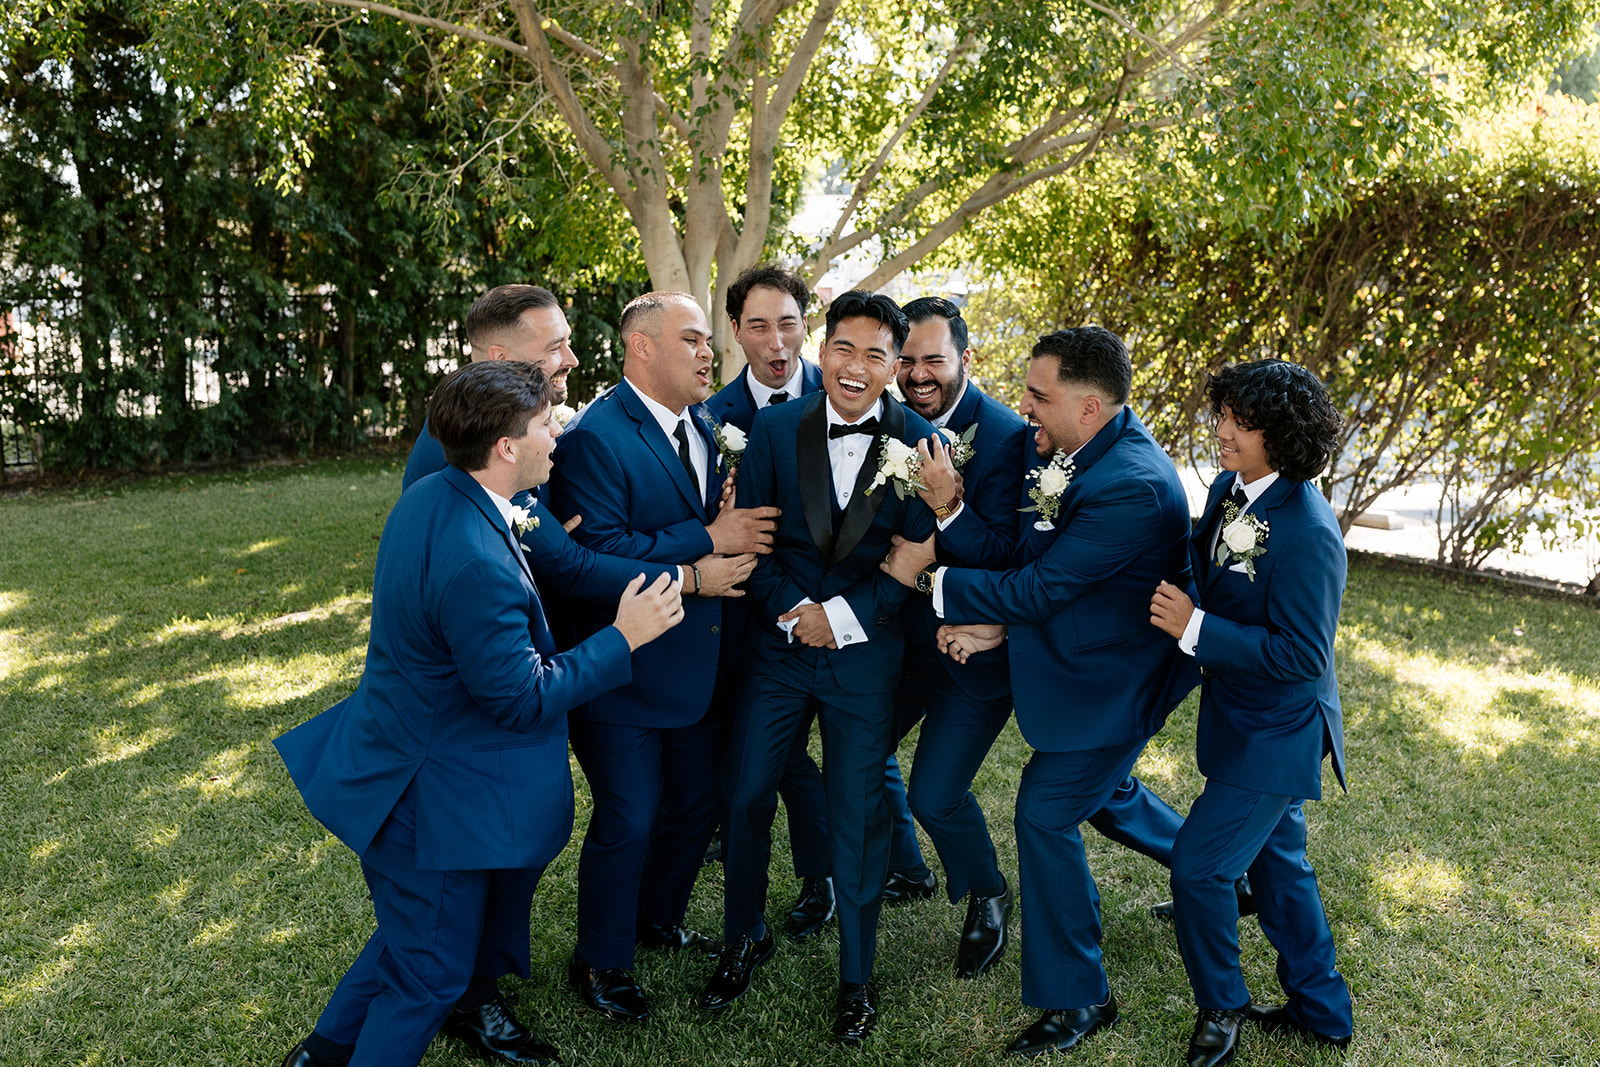 griffith house wedding anaheim california emotional first look bride and groom pictures bridesmaids groomsmen pictures